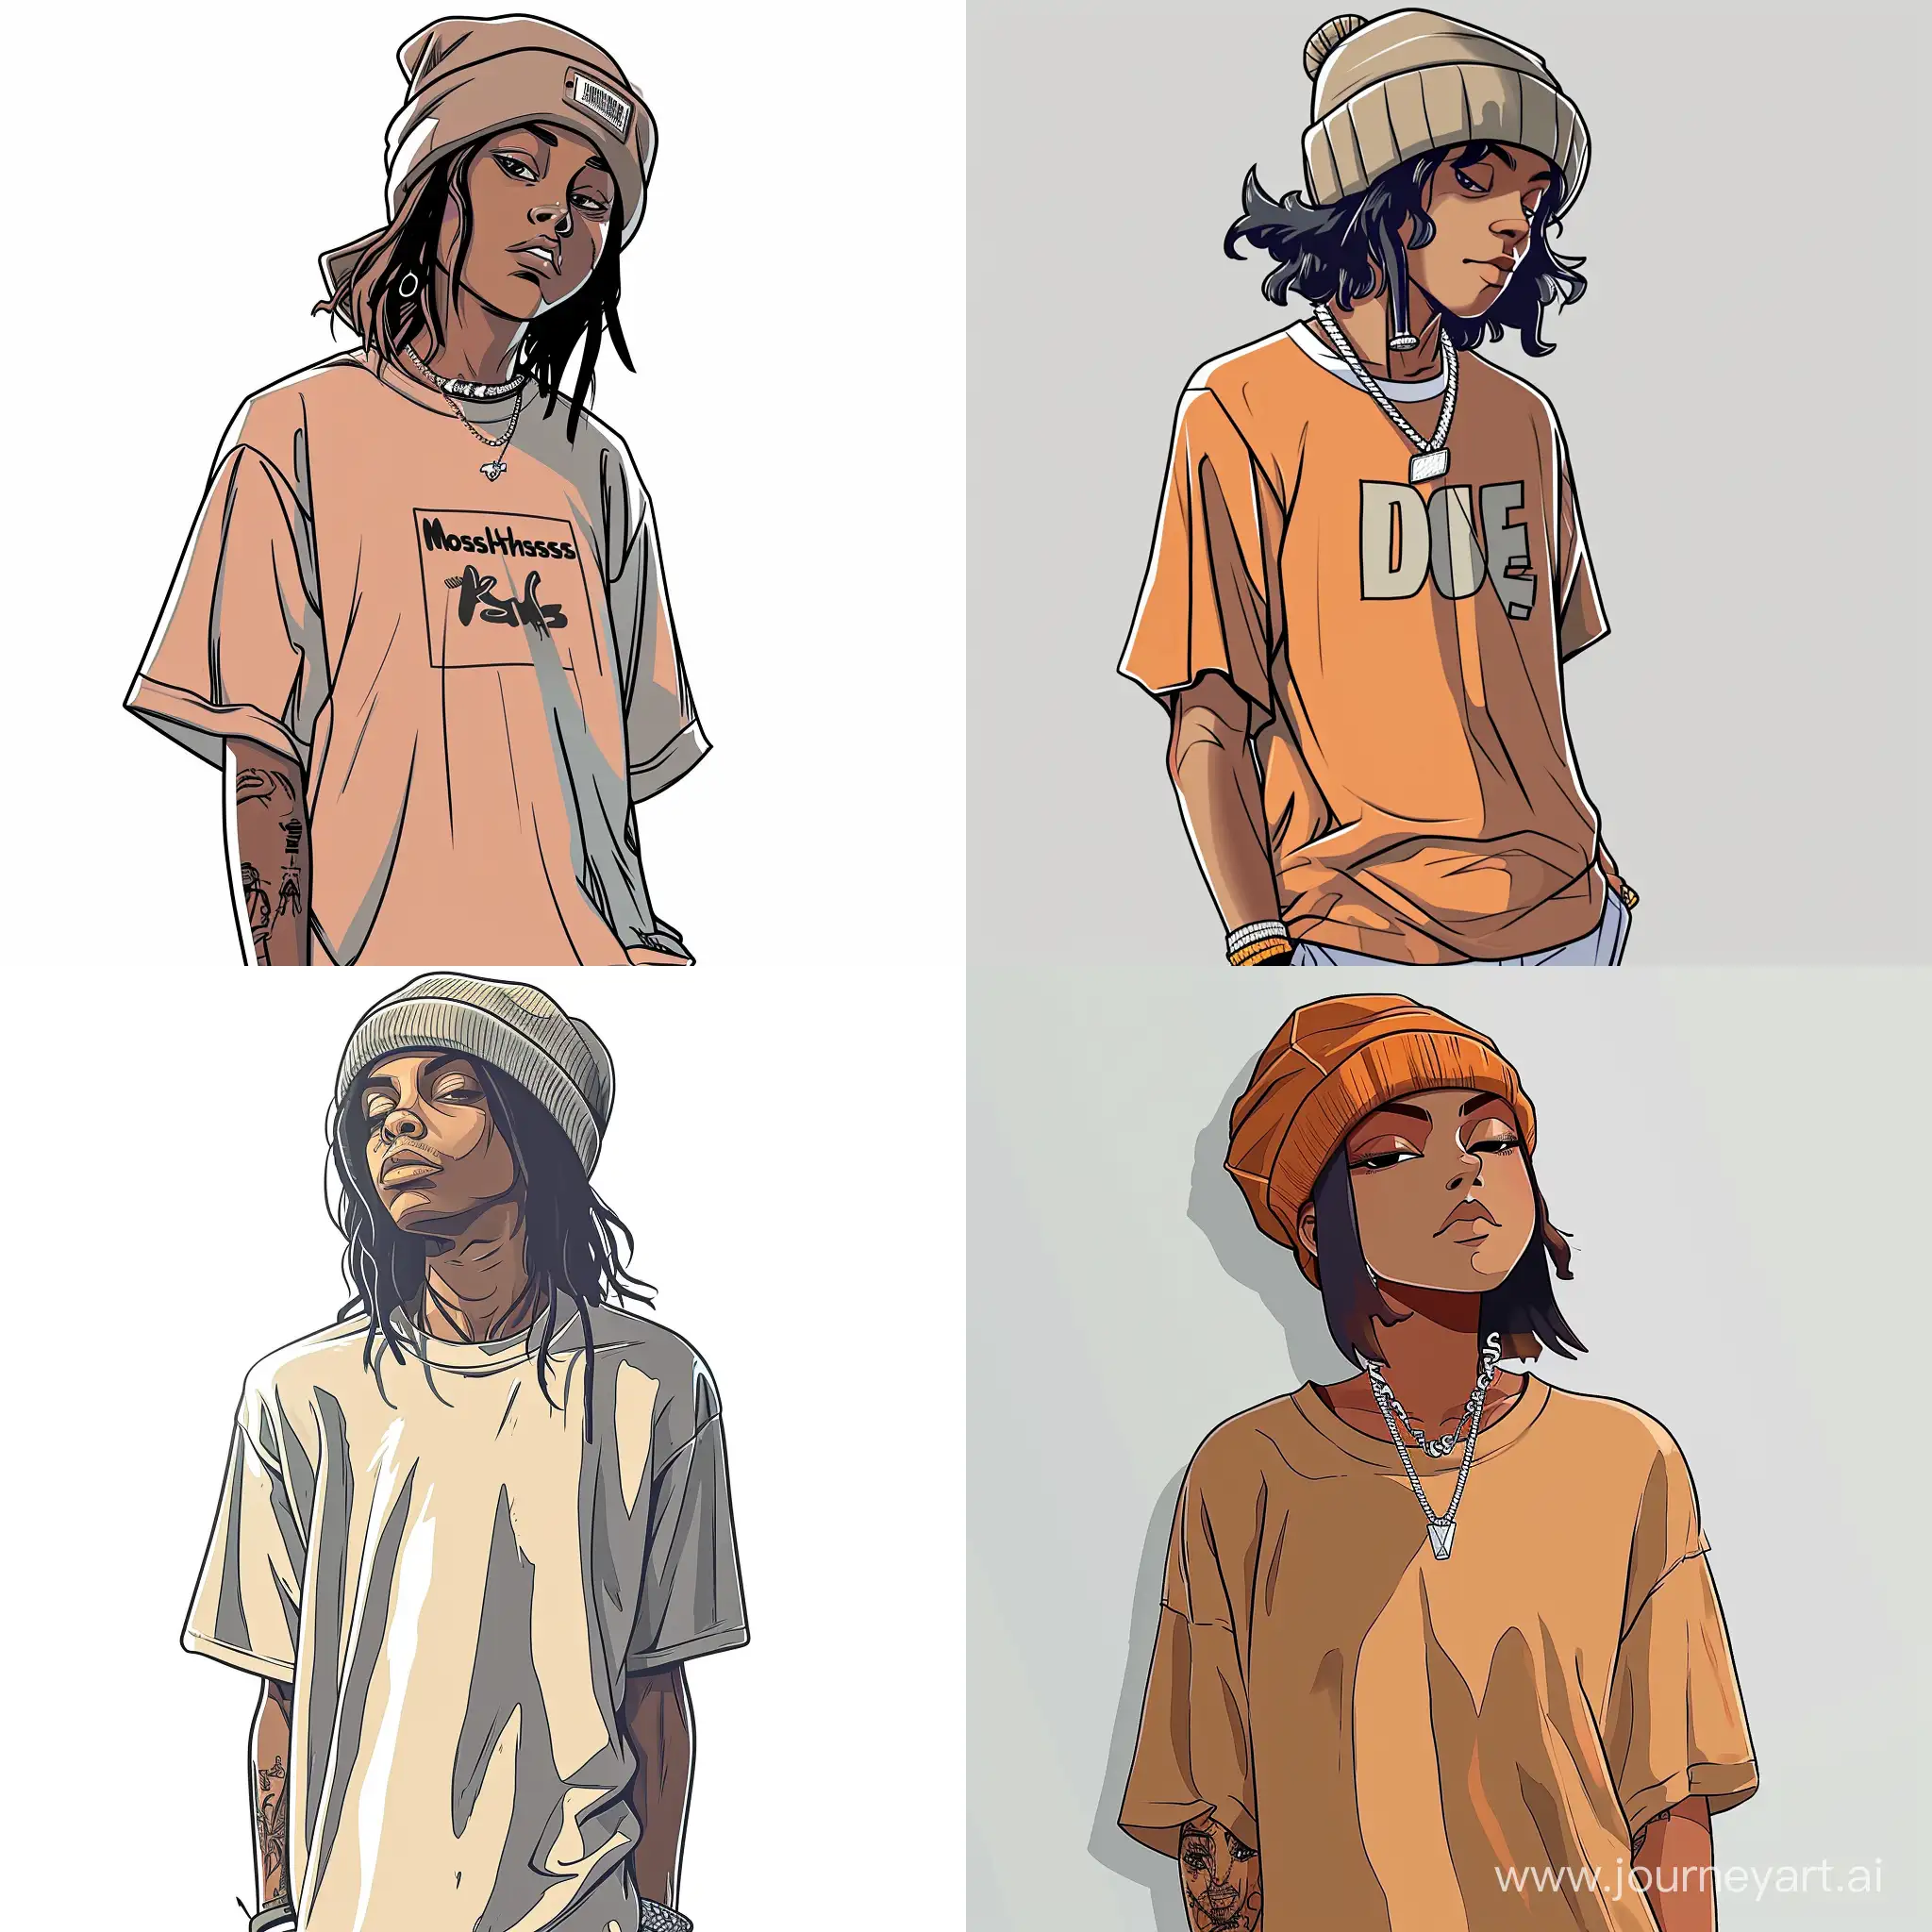 a cartoon of a person wearing a t - shirt and a beanie, dope, most dope, 2 d style, 2 d anime style, hiphop, cartoon art style, thug life, nipsey hussle, hip hop aesthetic, hip hop style, mcbess, anime style”, rap bling, lol style, gorillaz style, crips, hip hop

Variation number 1